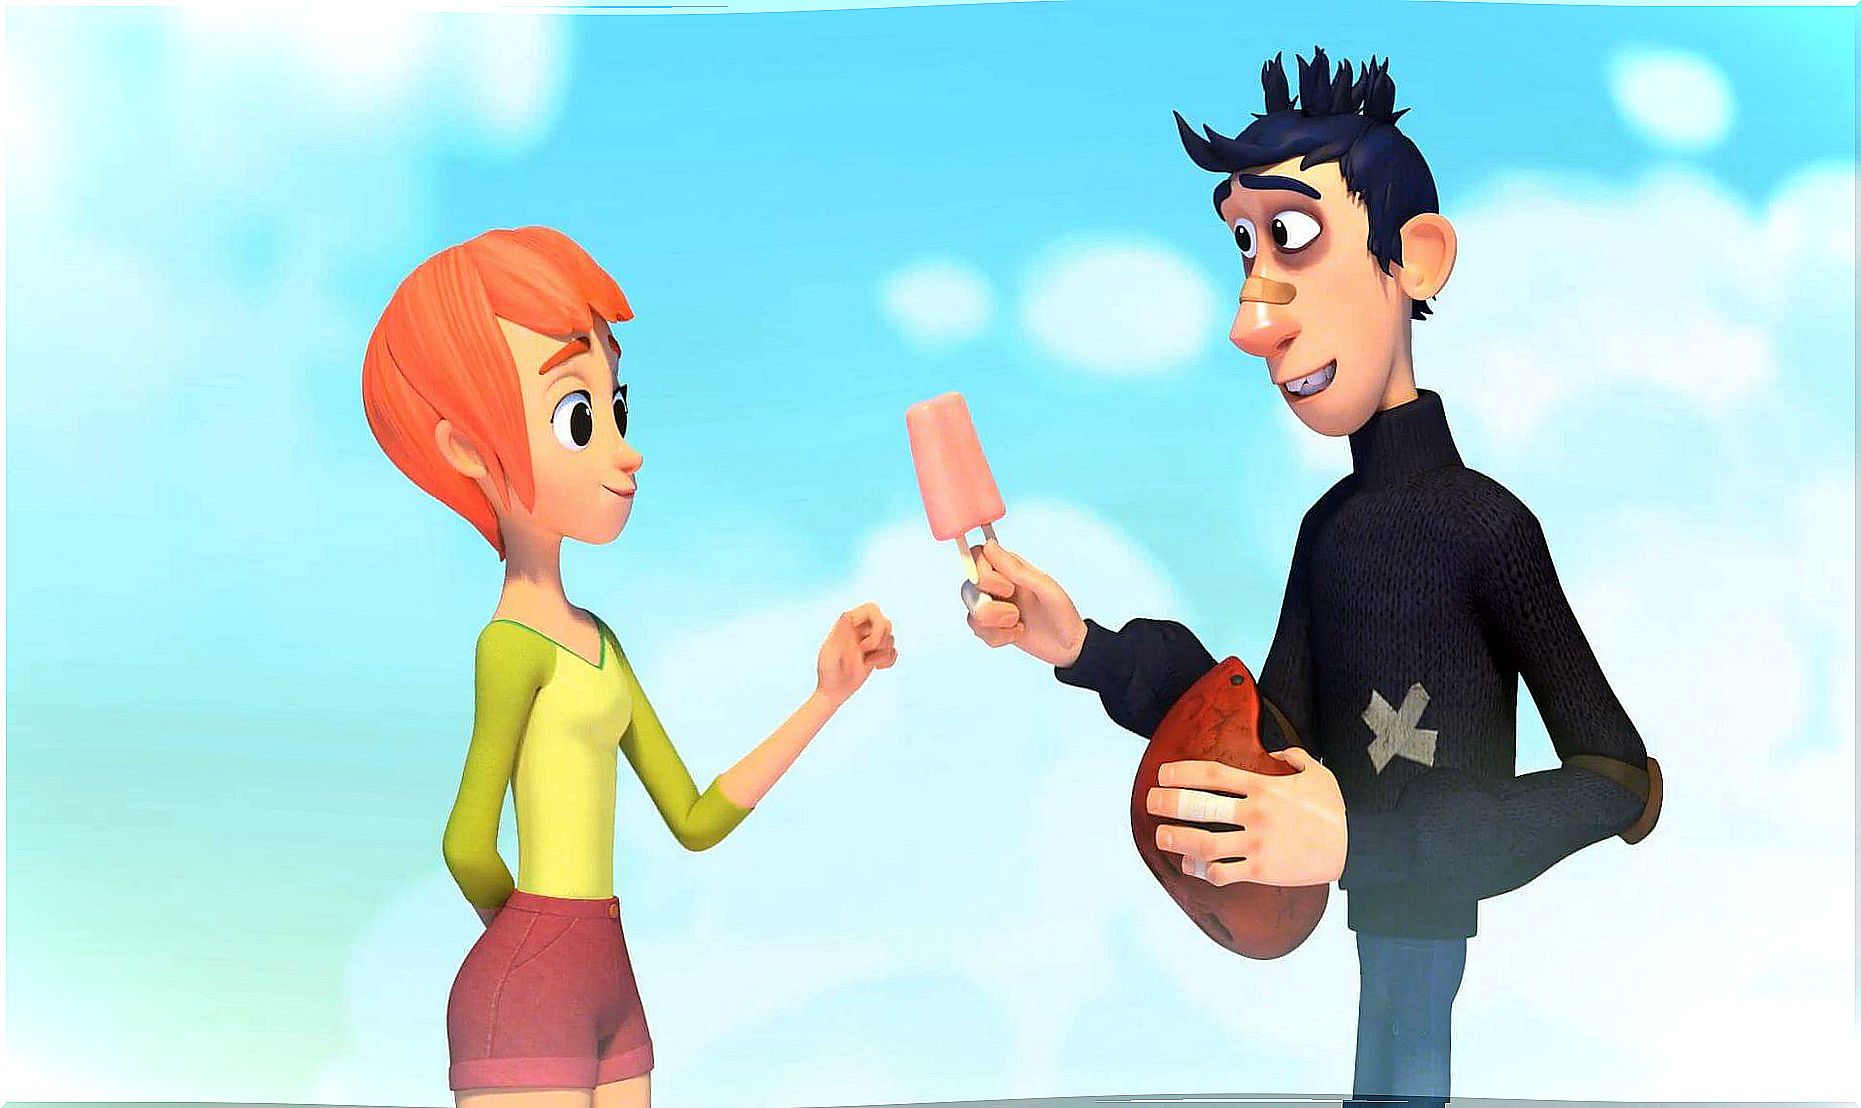 Boy offering an ice cream to girl